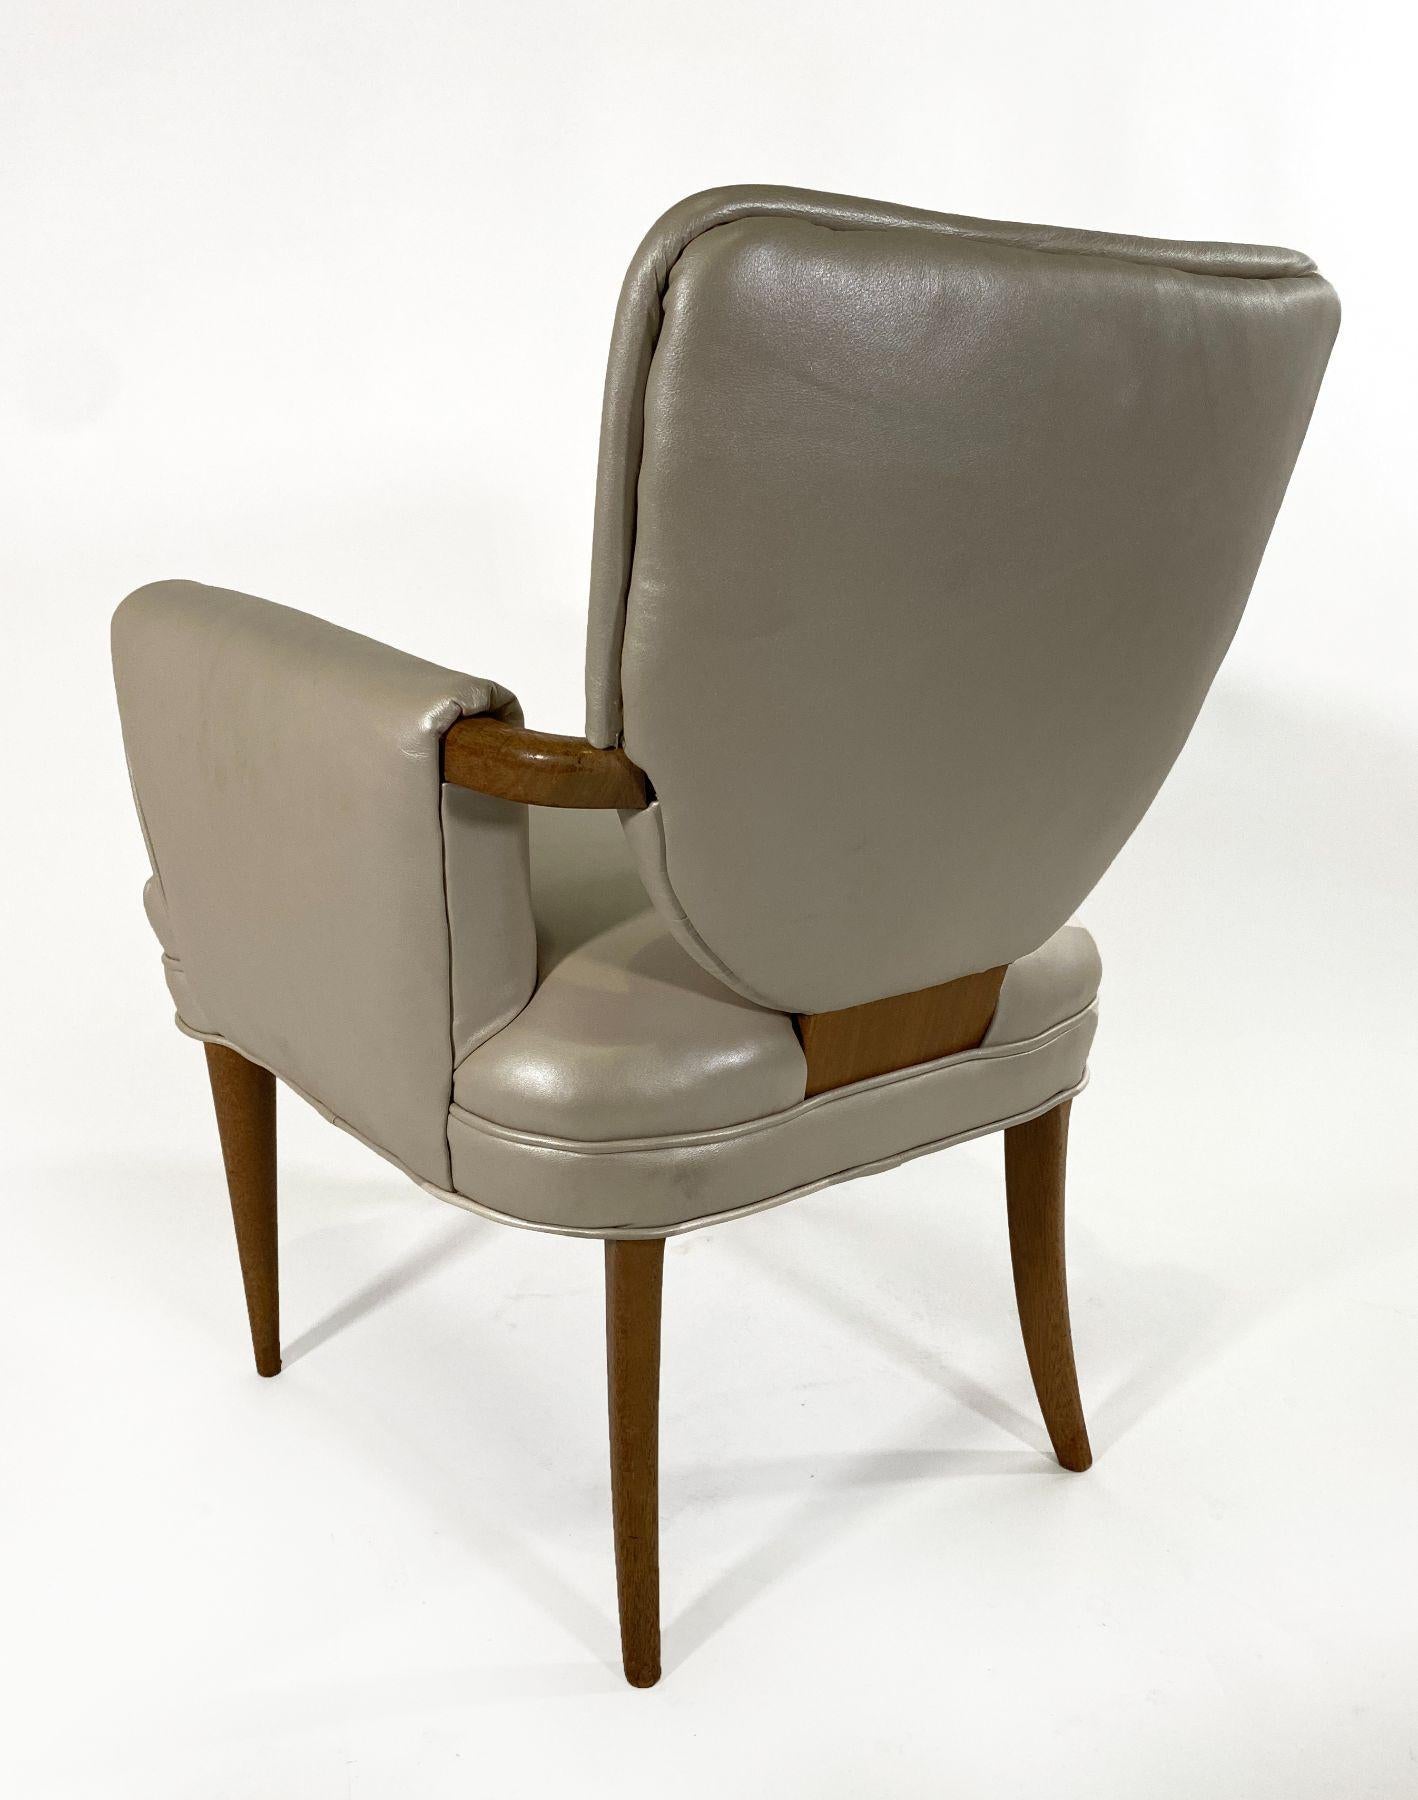 Mid-20th Century American Modern Bleached Mahogany and Leather Armchair, Paul Frankl For Sale